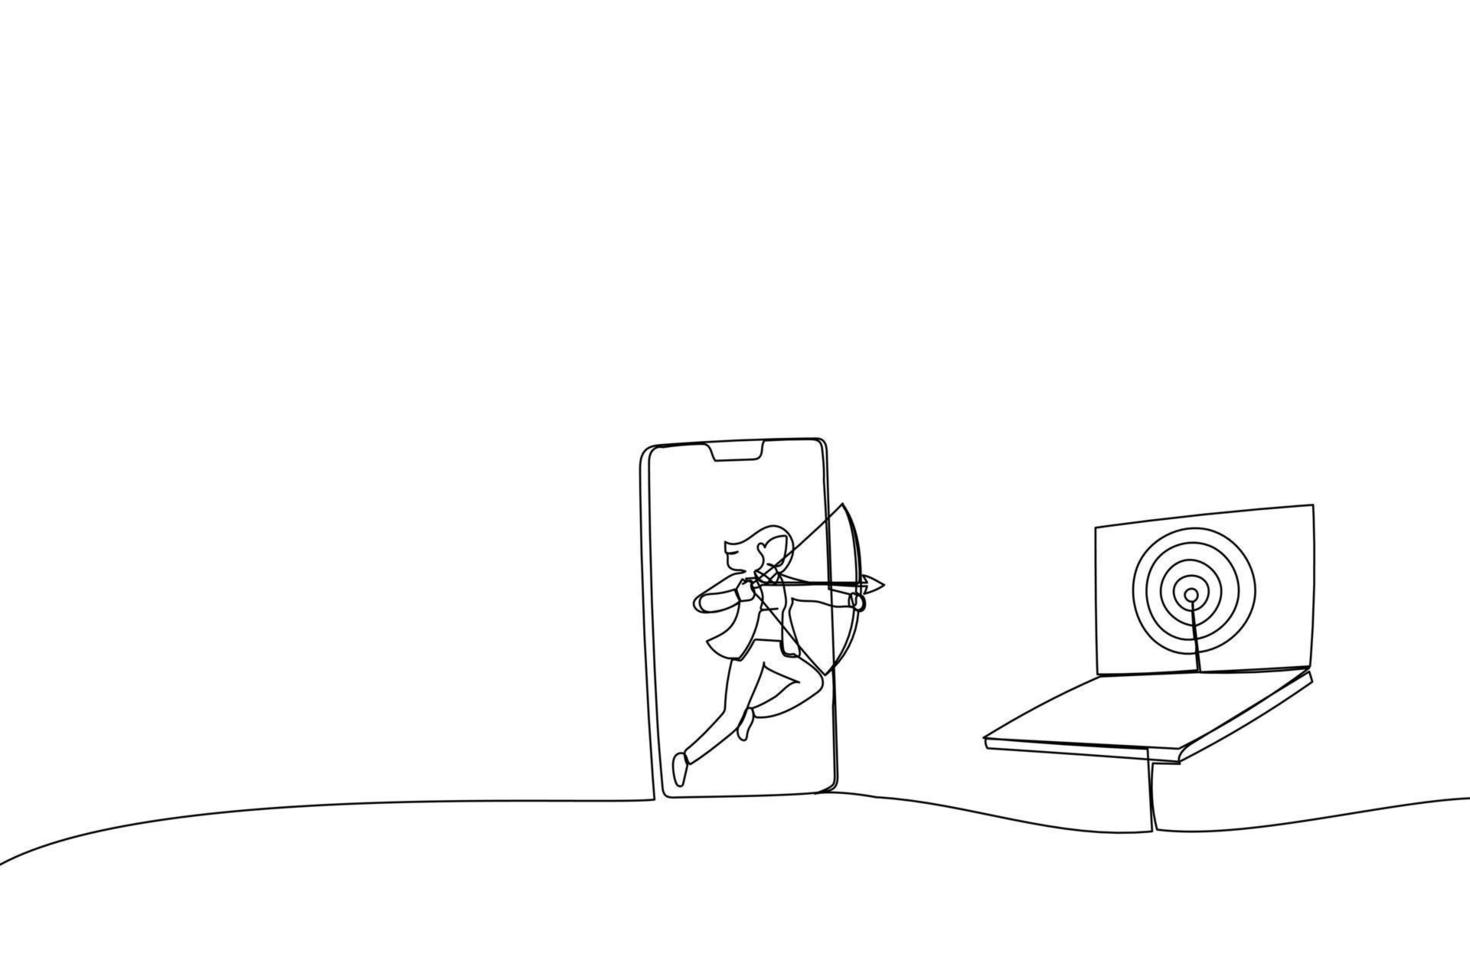 Cartoon of businesswoman from mobile app aiming target and other computer laptop. Metaphor for remarketing or behavioral retargeting in digital advertising. Single continuous line art style vector